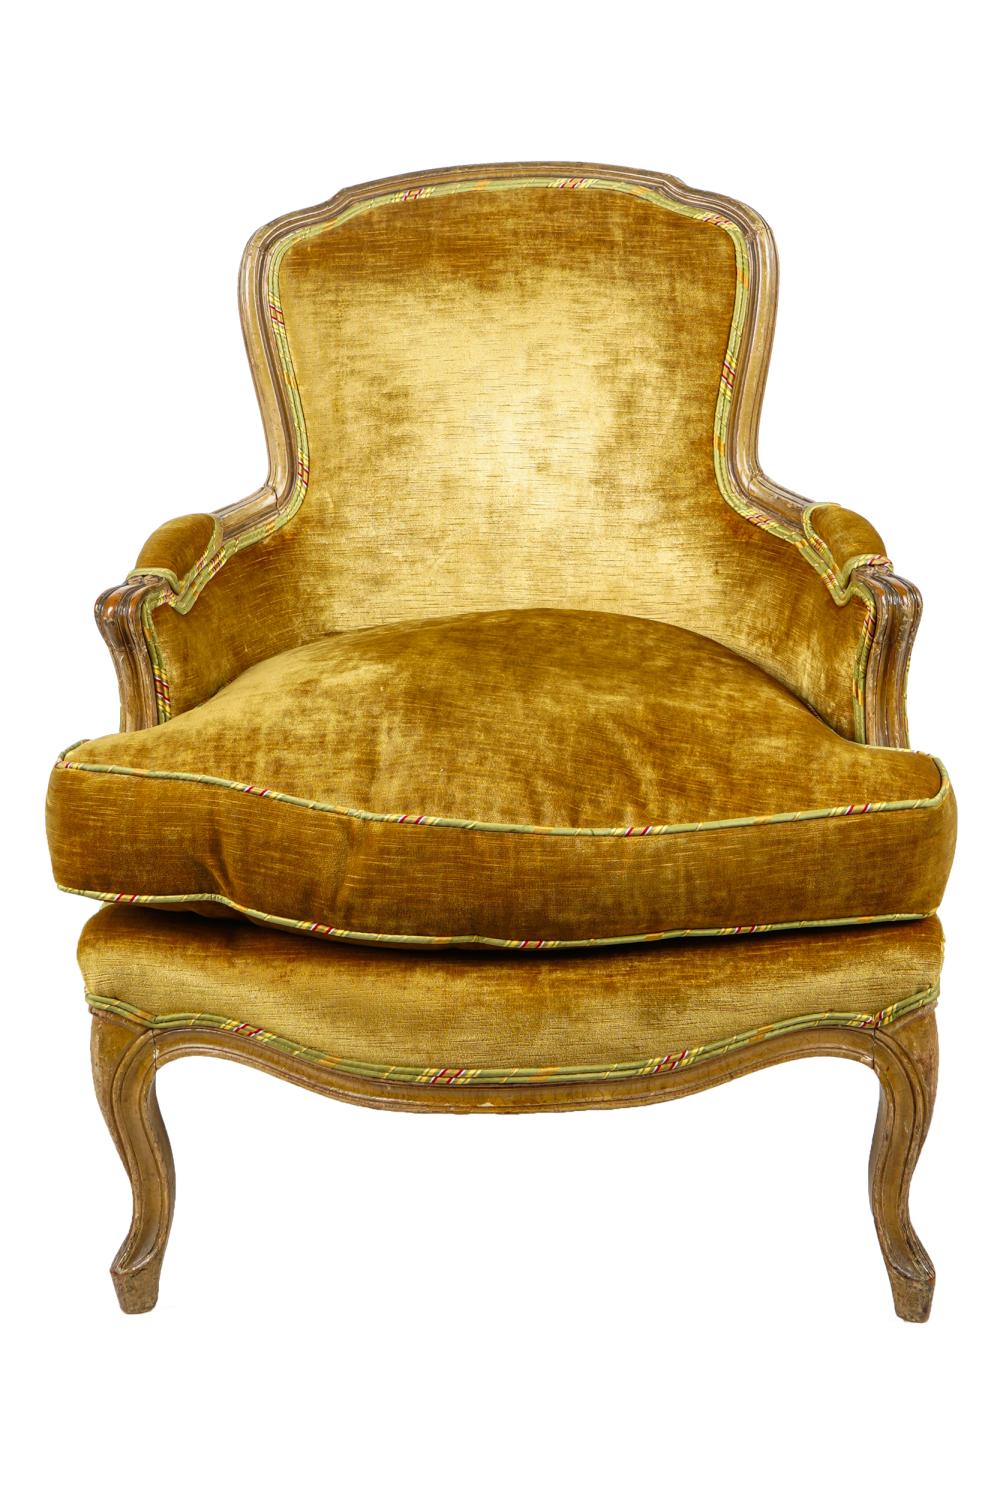 LOUIS XIV STYLE PAINTED BERGEREearly 3371fc